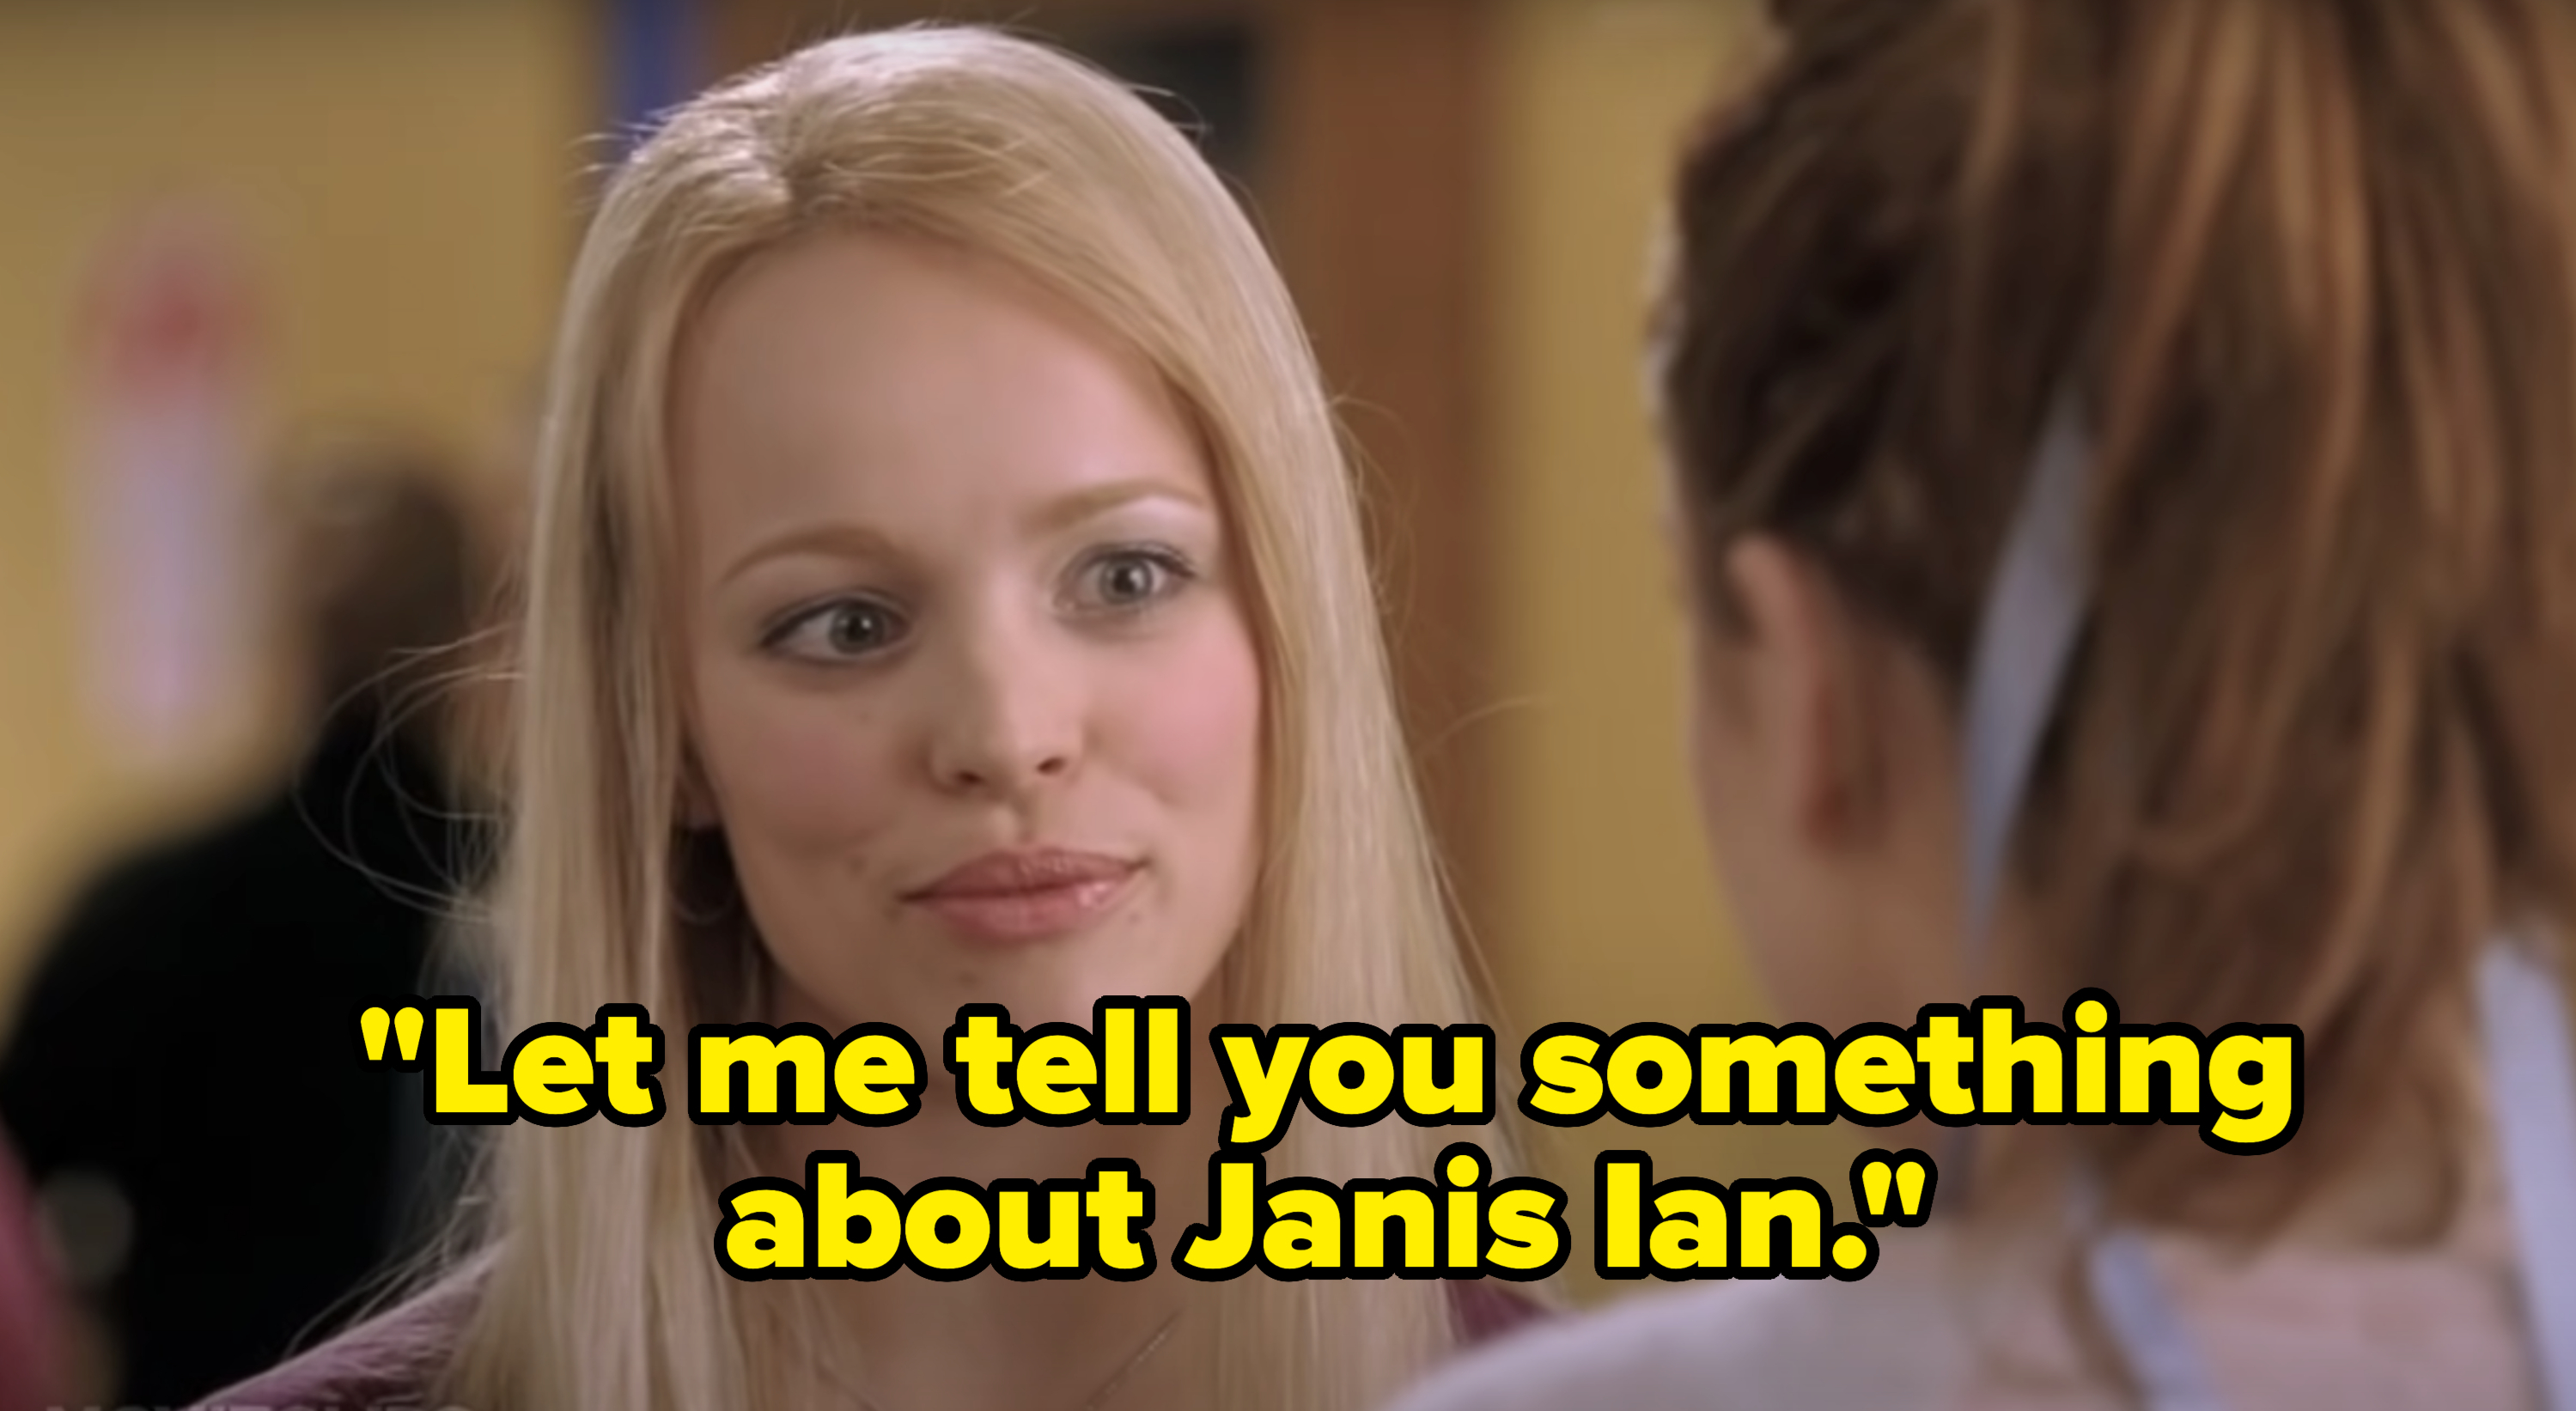 Regina George in the hallway looks at Cady Heron. Text reads &quot;Let me tell you something about Janis Ian.&quot;